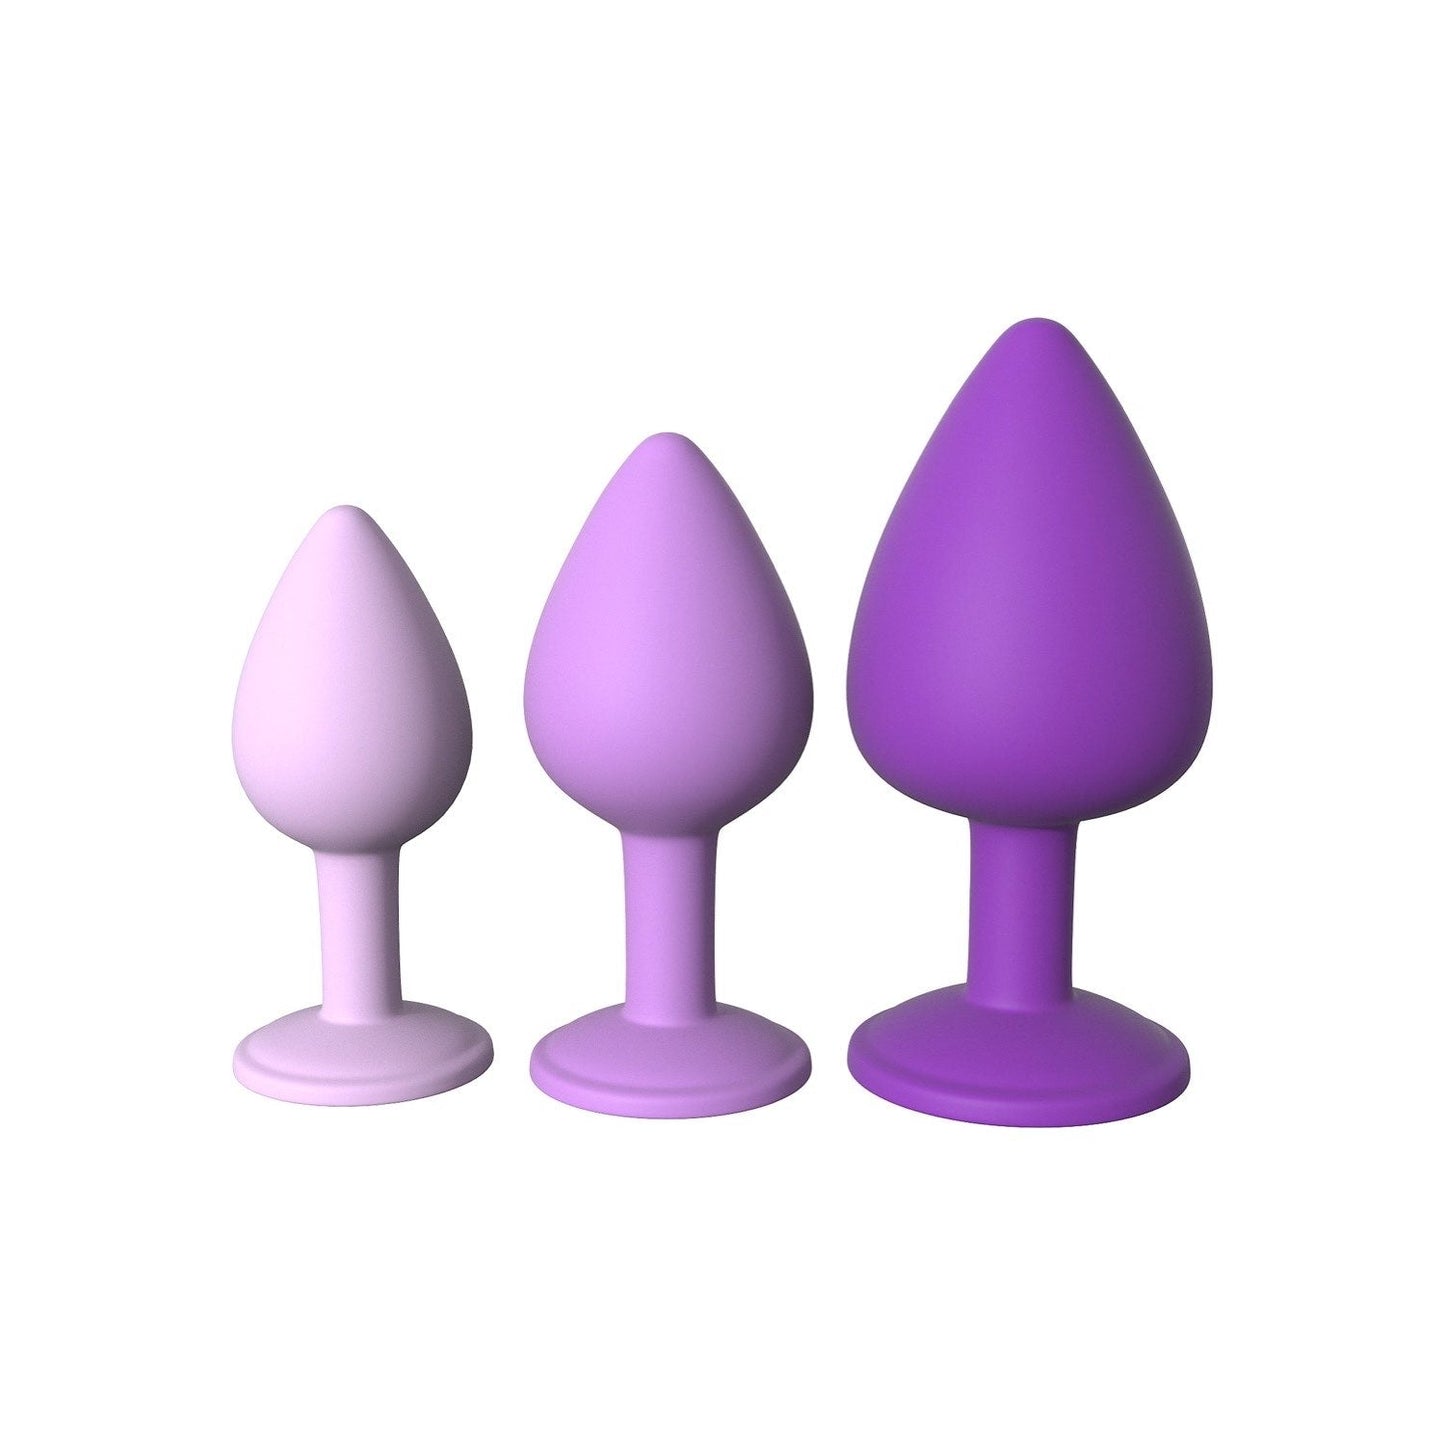 Little Gems Trainer Set - Purple Butt Plugs with Jewel Bases - Set of 3 Sizes